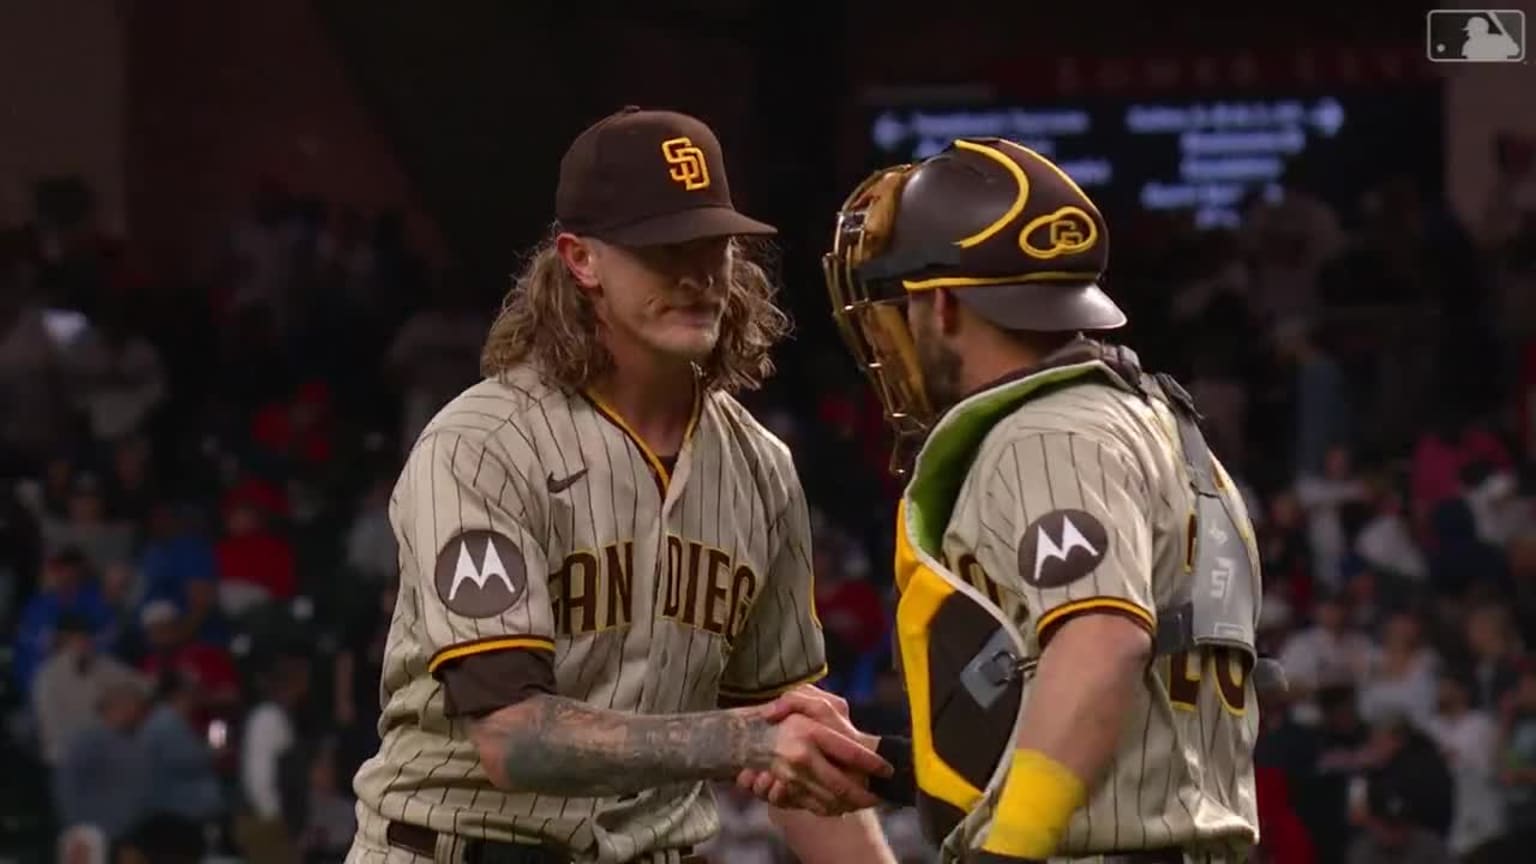 Josh Hader of the San Diego Padres poses for a photo with a fan